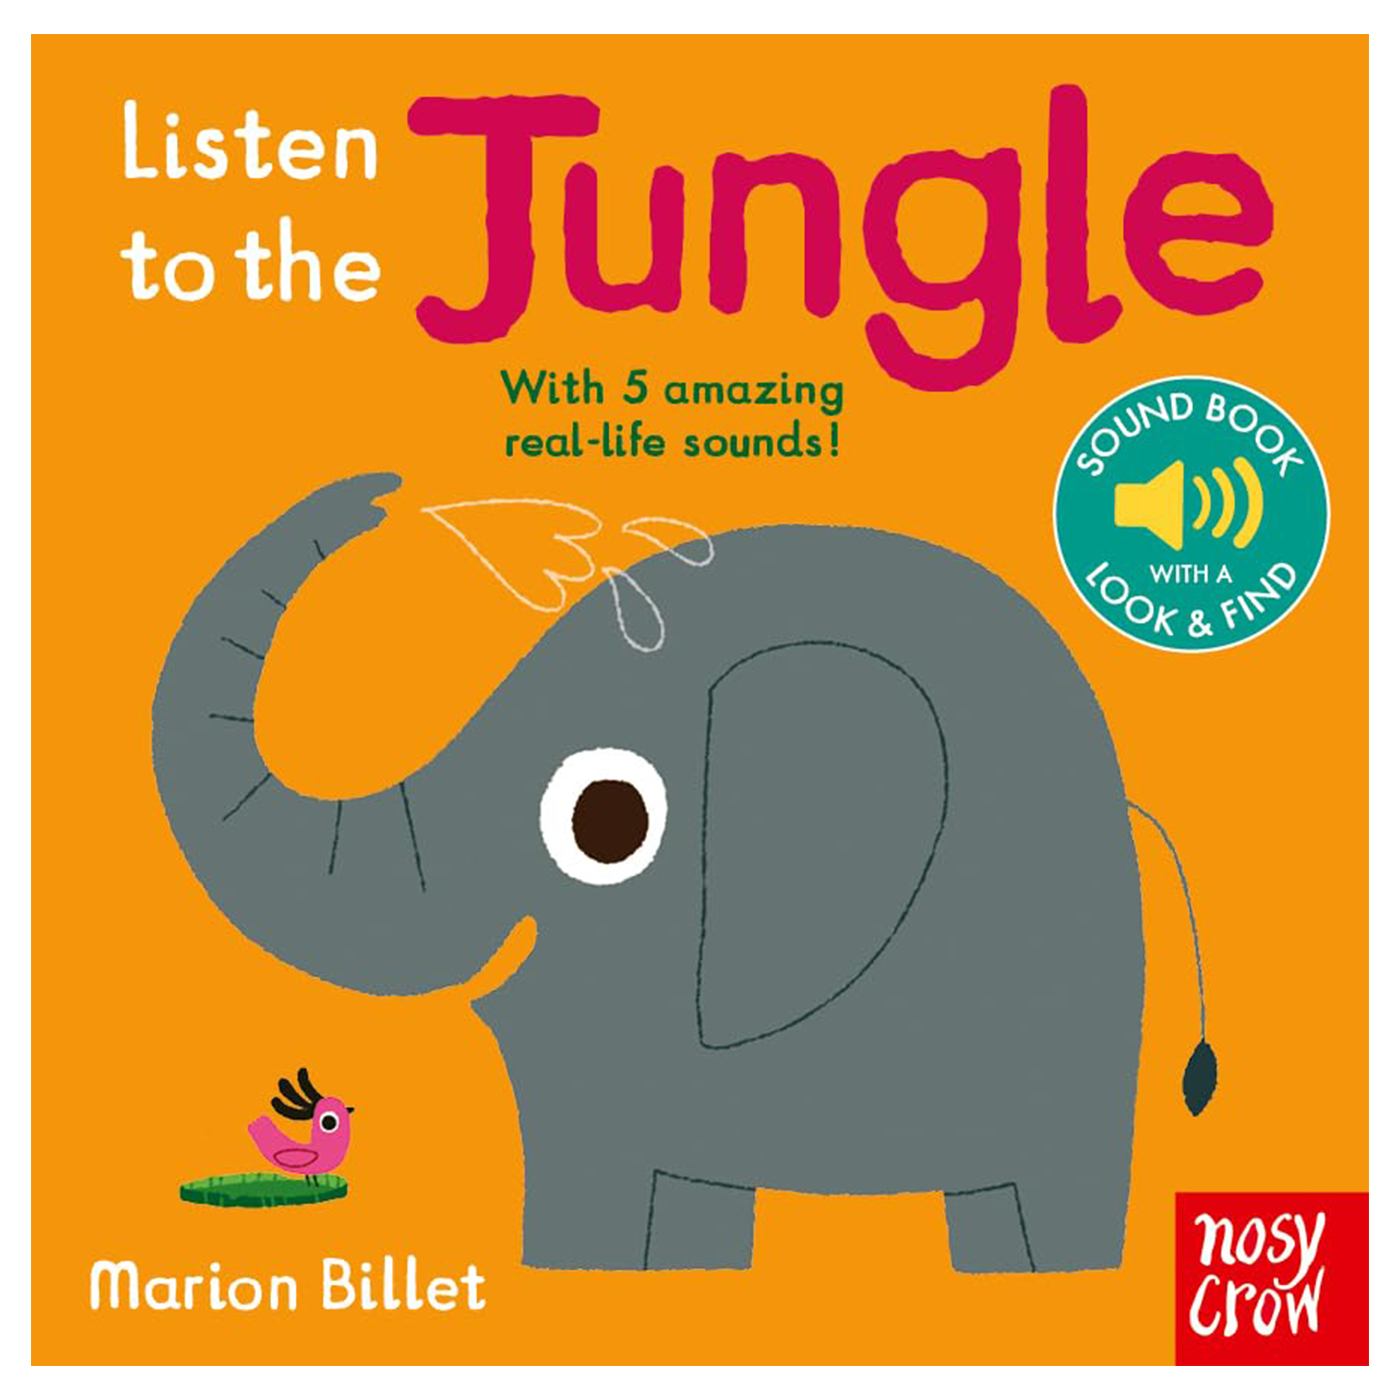  Listen to the: Jungle